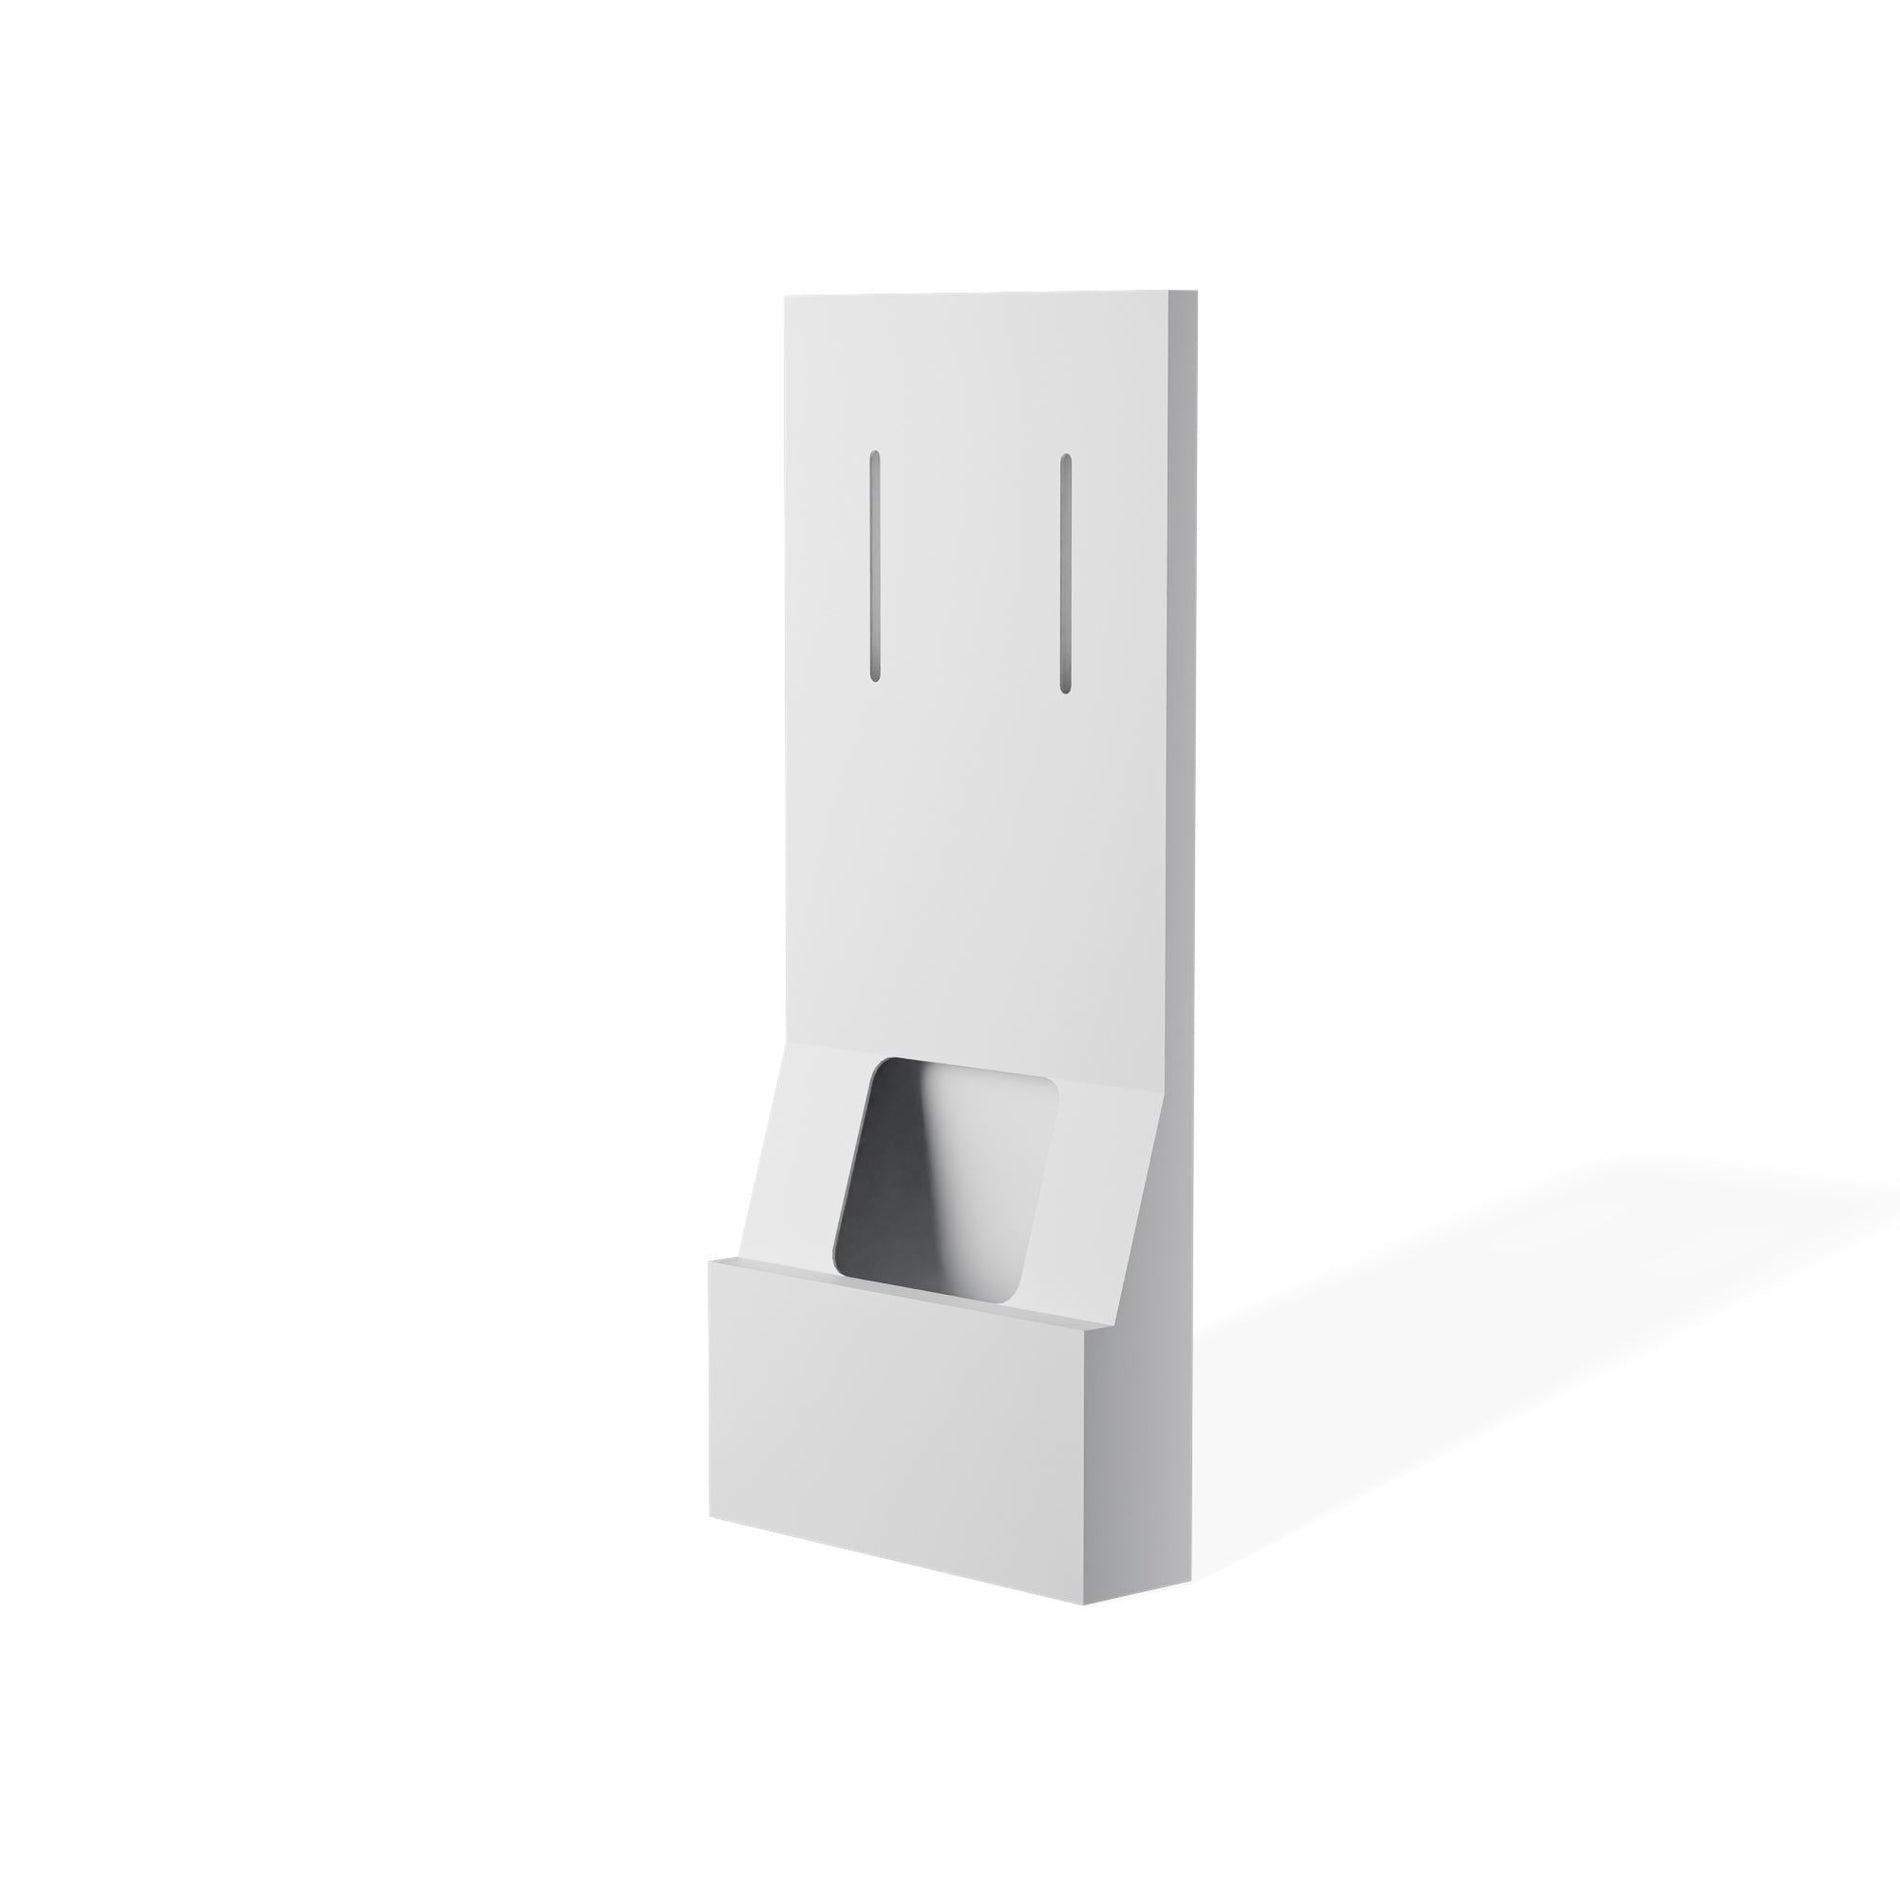 Quell Furniture of Meeting Booth - 6 personnesMonitor stand